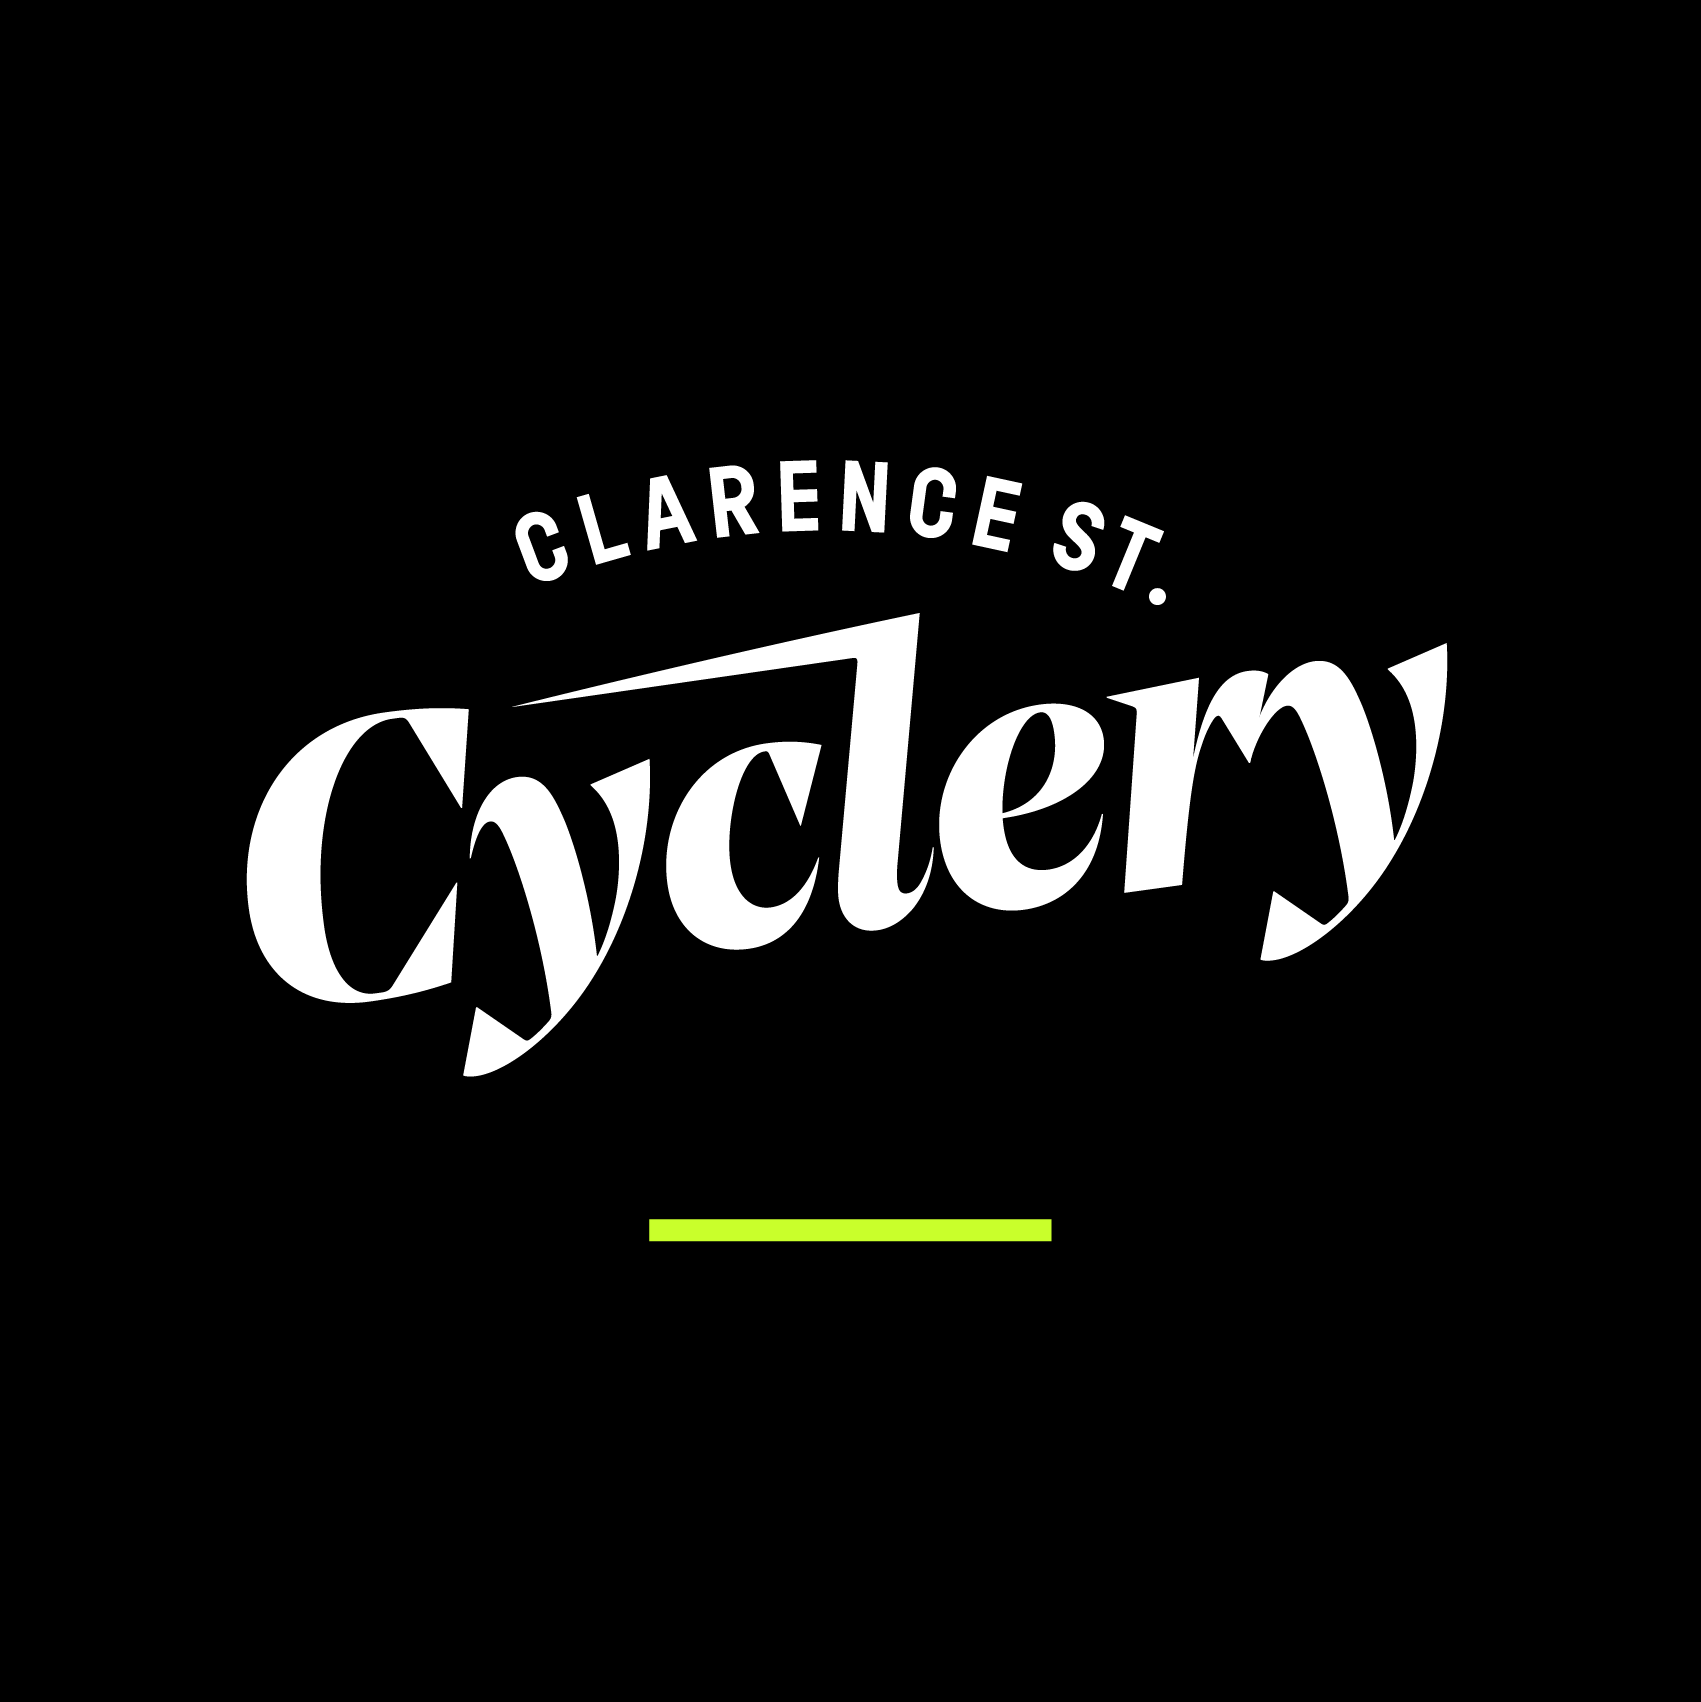 MAAP X Clarence St Cyclery Jersey 2.0